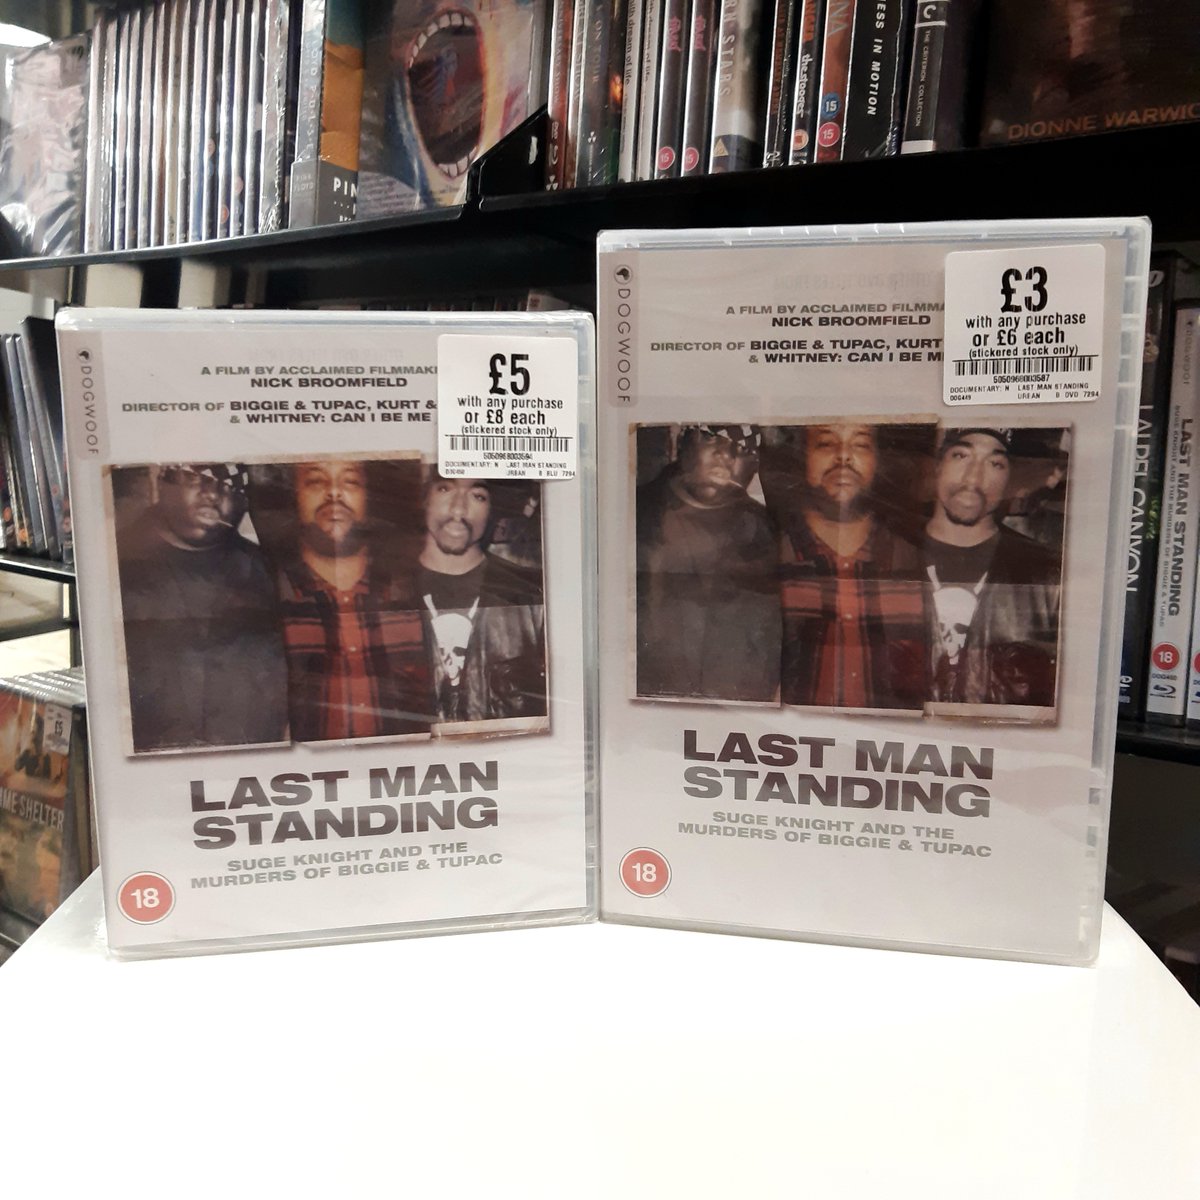 Nick Broomfield's Last Man Standing untangles the web of conspiracy and rivalry surrounding the deaths of hip-hop legends Biggie Smalls and Tupac Shakur. Just £3 with any purchase on DVD, £5 with any purchase on Blu-ray! #gettofopp